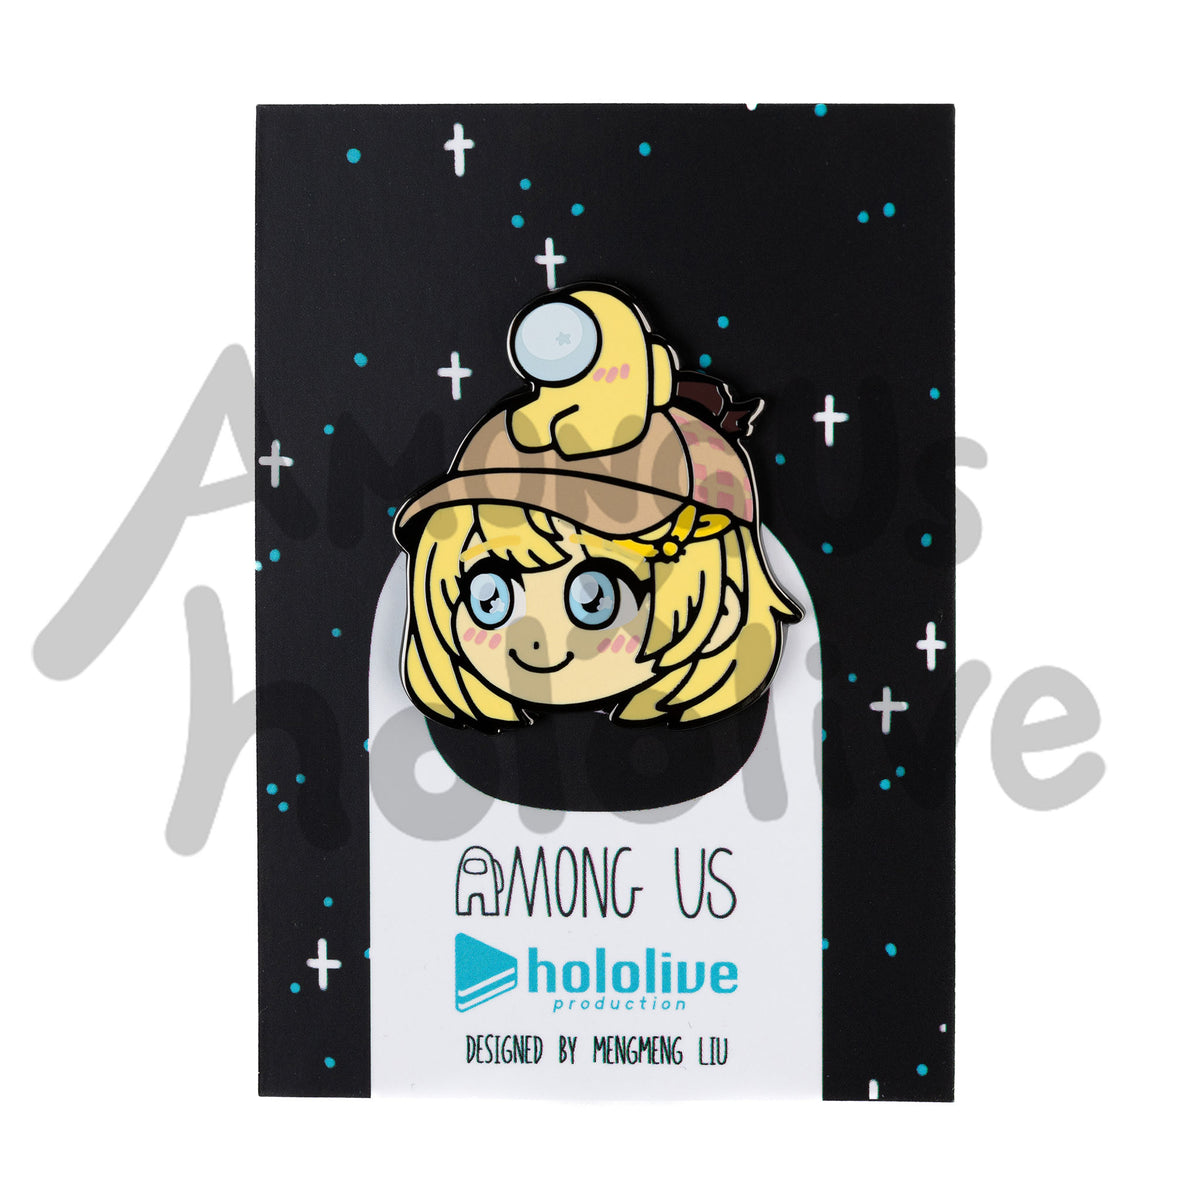 Hololive x Among Us black backing card covered with blue and white stars. There&#39;s a white Crewmate in the middle of the card covered up by an enamel pin of Amelia’s face, a tiny yellow Crewmate sitting atop her head. Backing Card text reads &quot;Among Us Hololive Production Designed by Mengmeng Liu.&quot;